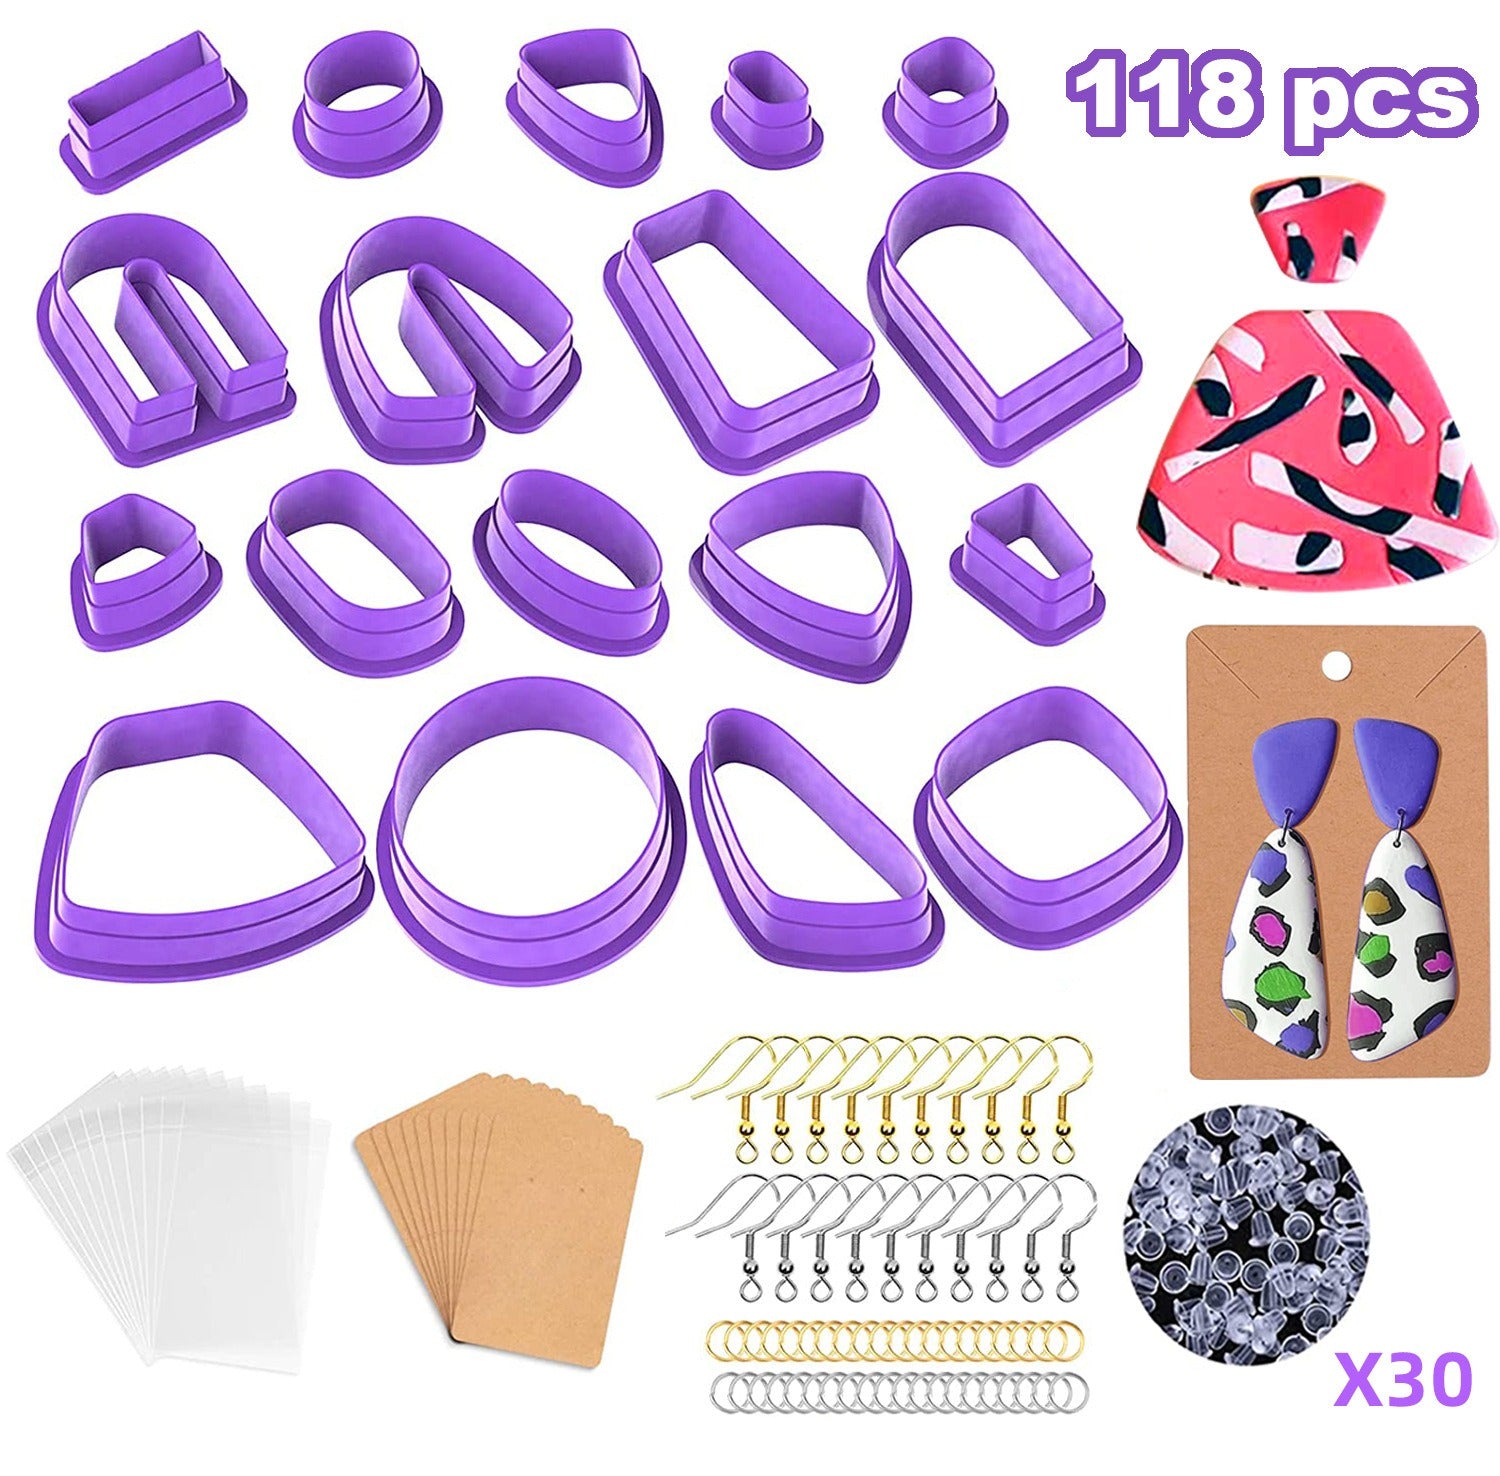 Multi Shape Clay Cutter Set, Polymer Clay Cutter Set with Earring Hooks and Jump Rings, Geometric Shape Clay Scrapers